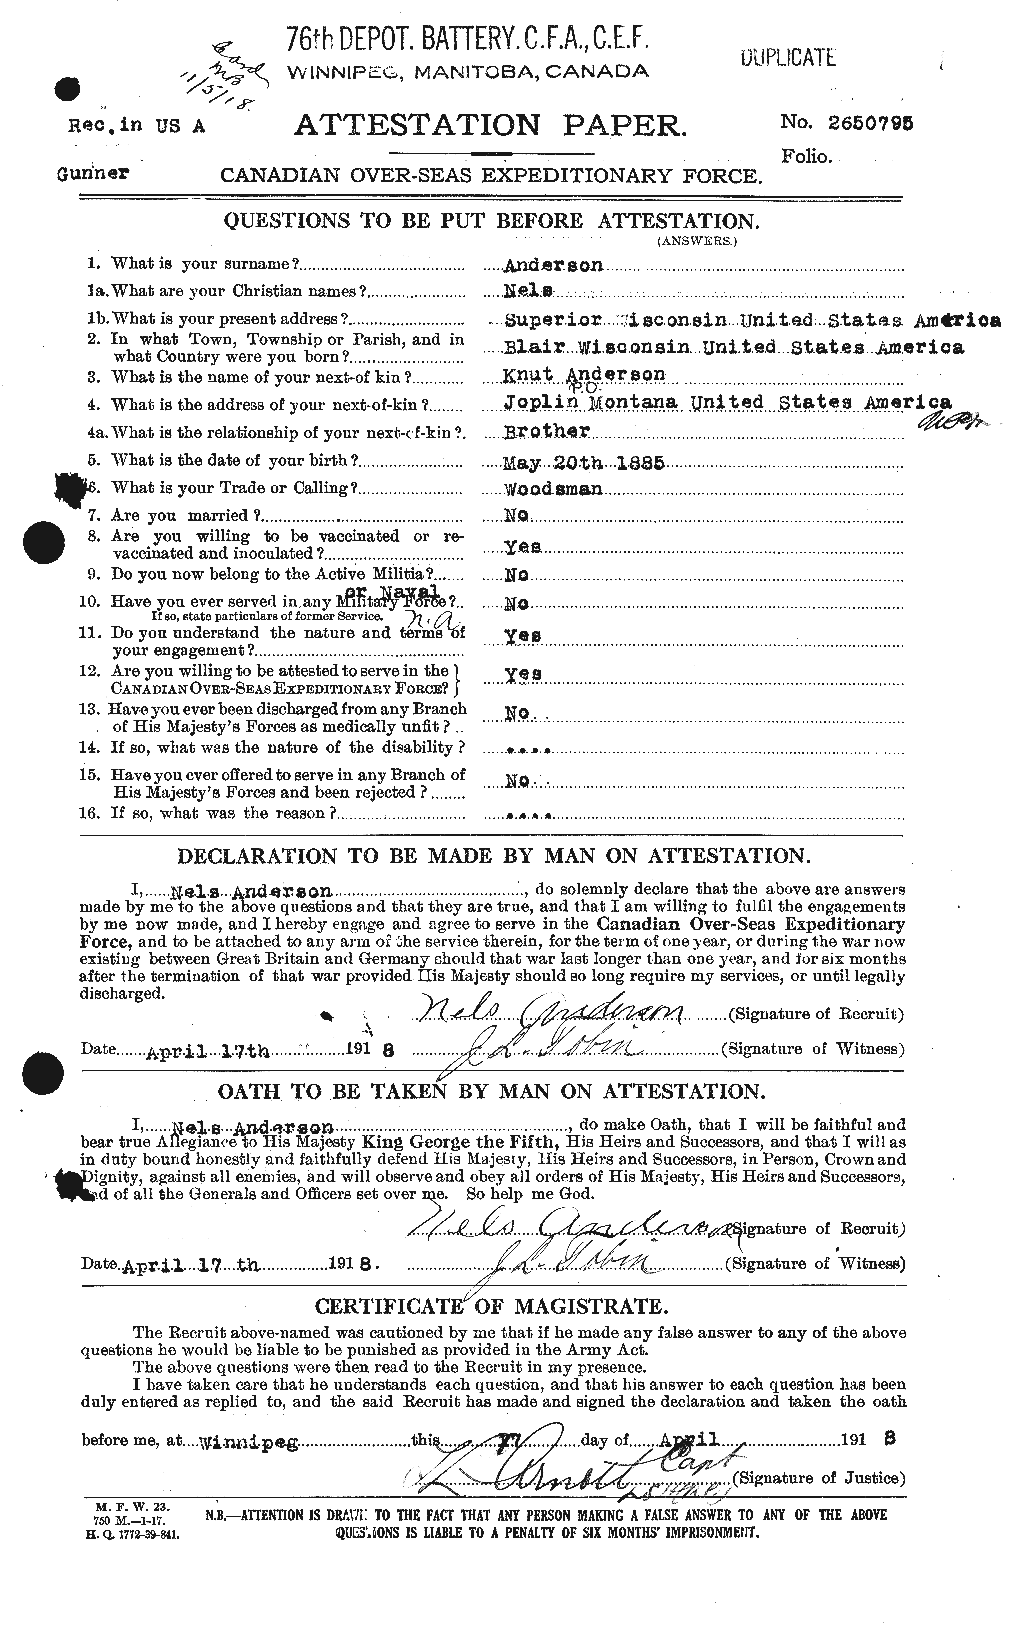 Personnel Records of the First World War - CEF 207436a